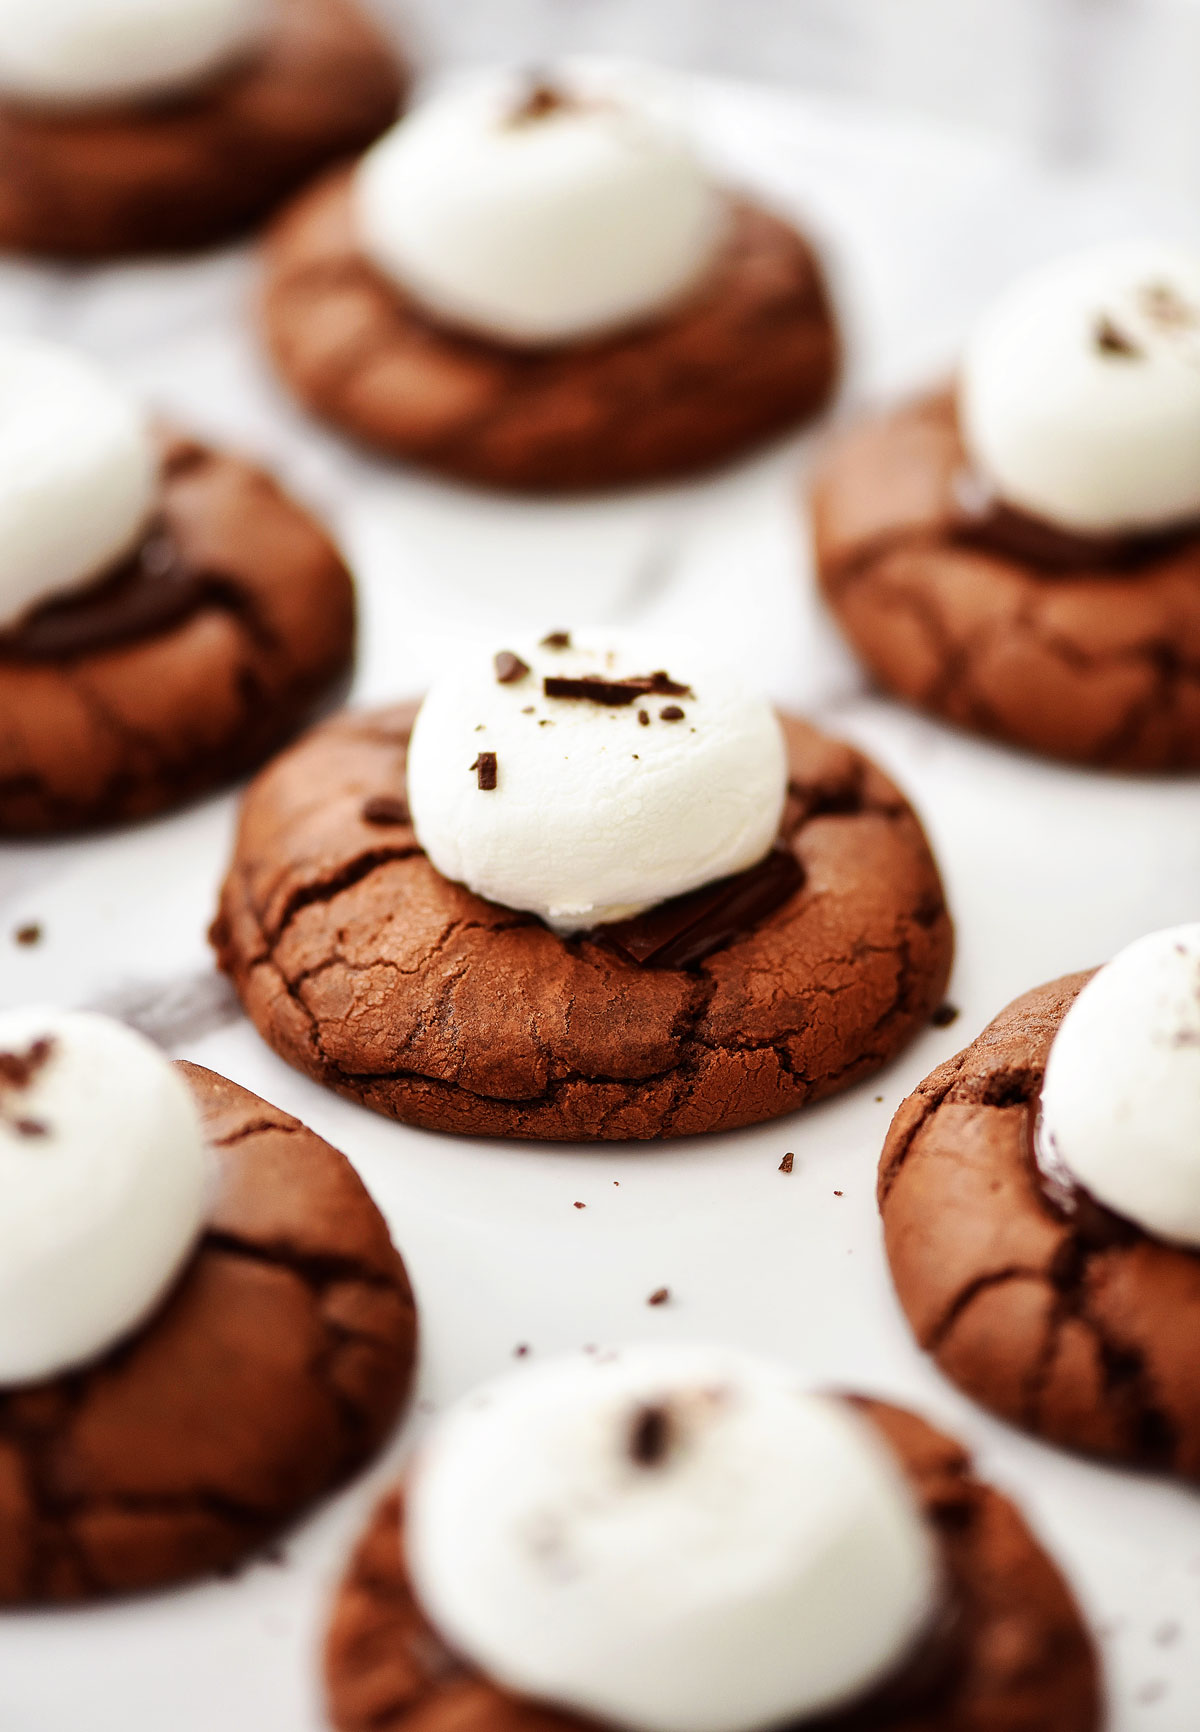 Hot Cocoa Cookies are soft and chewy chocolate cookies with melted marshmallows and a surprise chocolate center. Life-in-the-Lofthouse.com